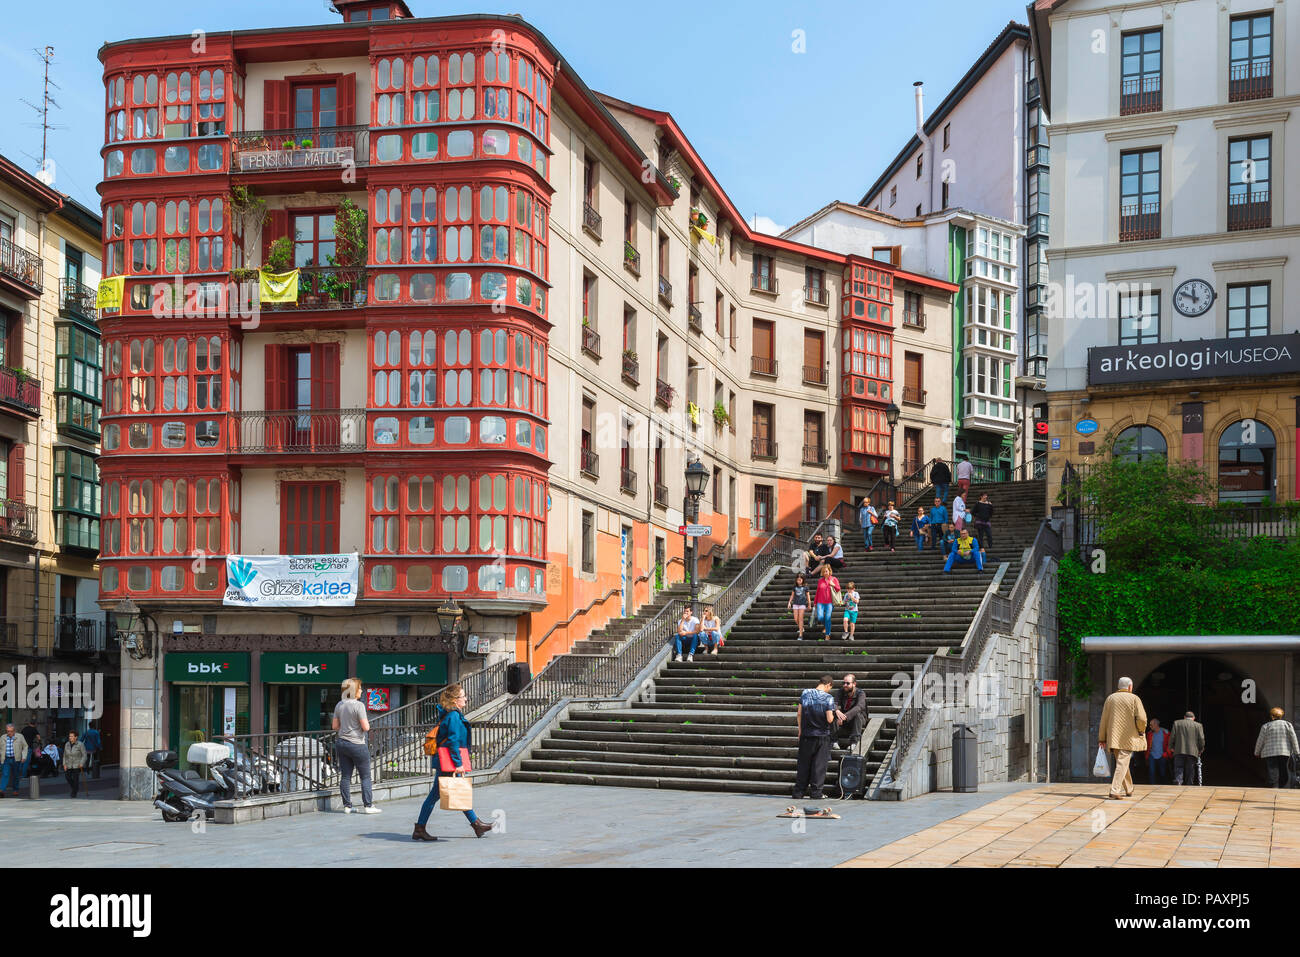 Bilbao Old Town, view of buildings and people in the Plaza de Unamuno in the center of the old town (Casco Viejo) area of Bilbao, Spain. Stock Photo